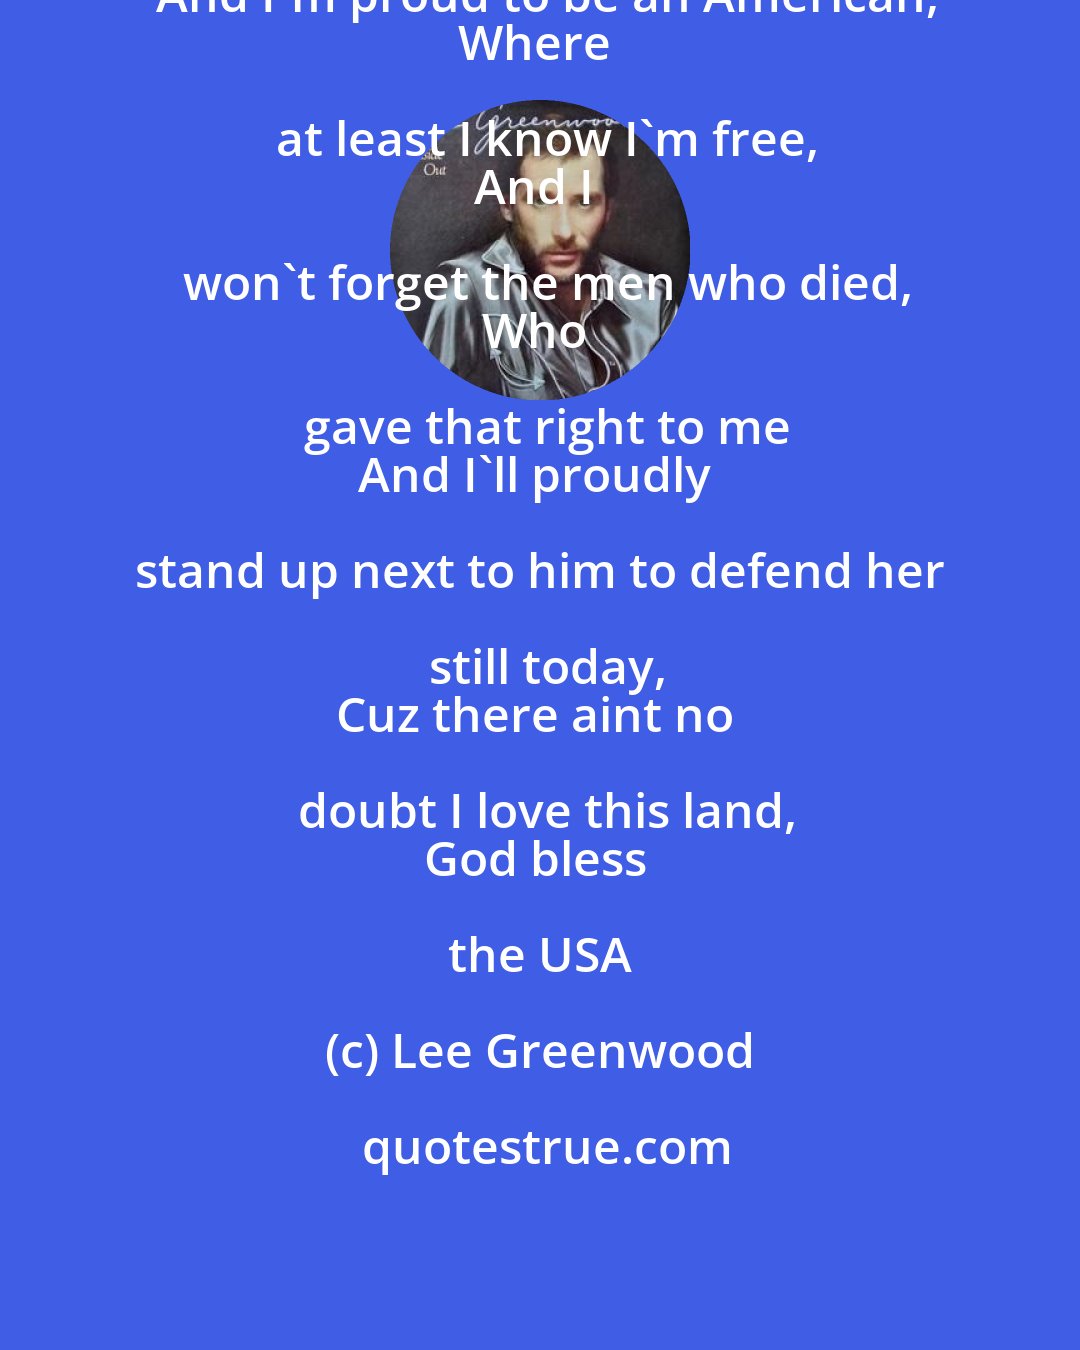 Lee Greenwood: And I'm proud to be an American,
Where at least I know I'm free,
And I won't forget the men who died,
Who gave that right to me
And I'll proudly stand up next to him to defend her still today,
Cuz there aint no doubt I love this land,
God bless the USA